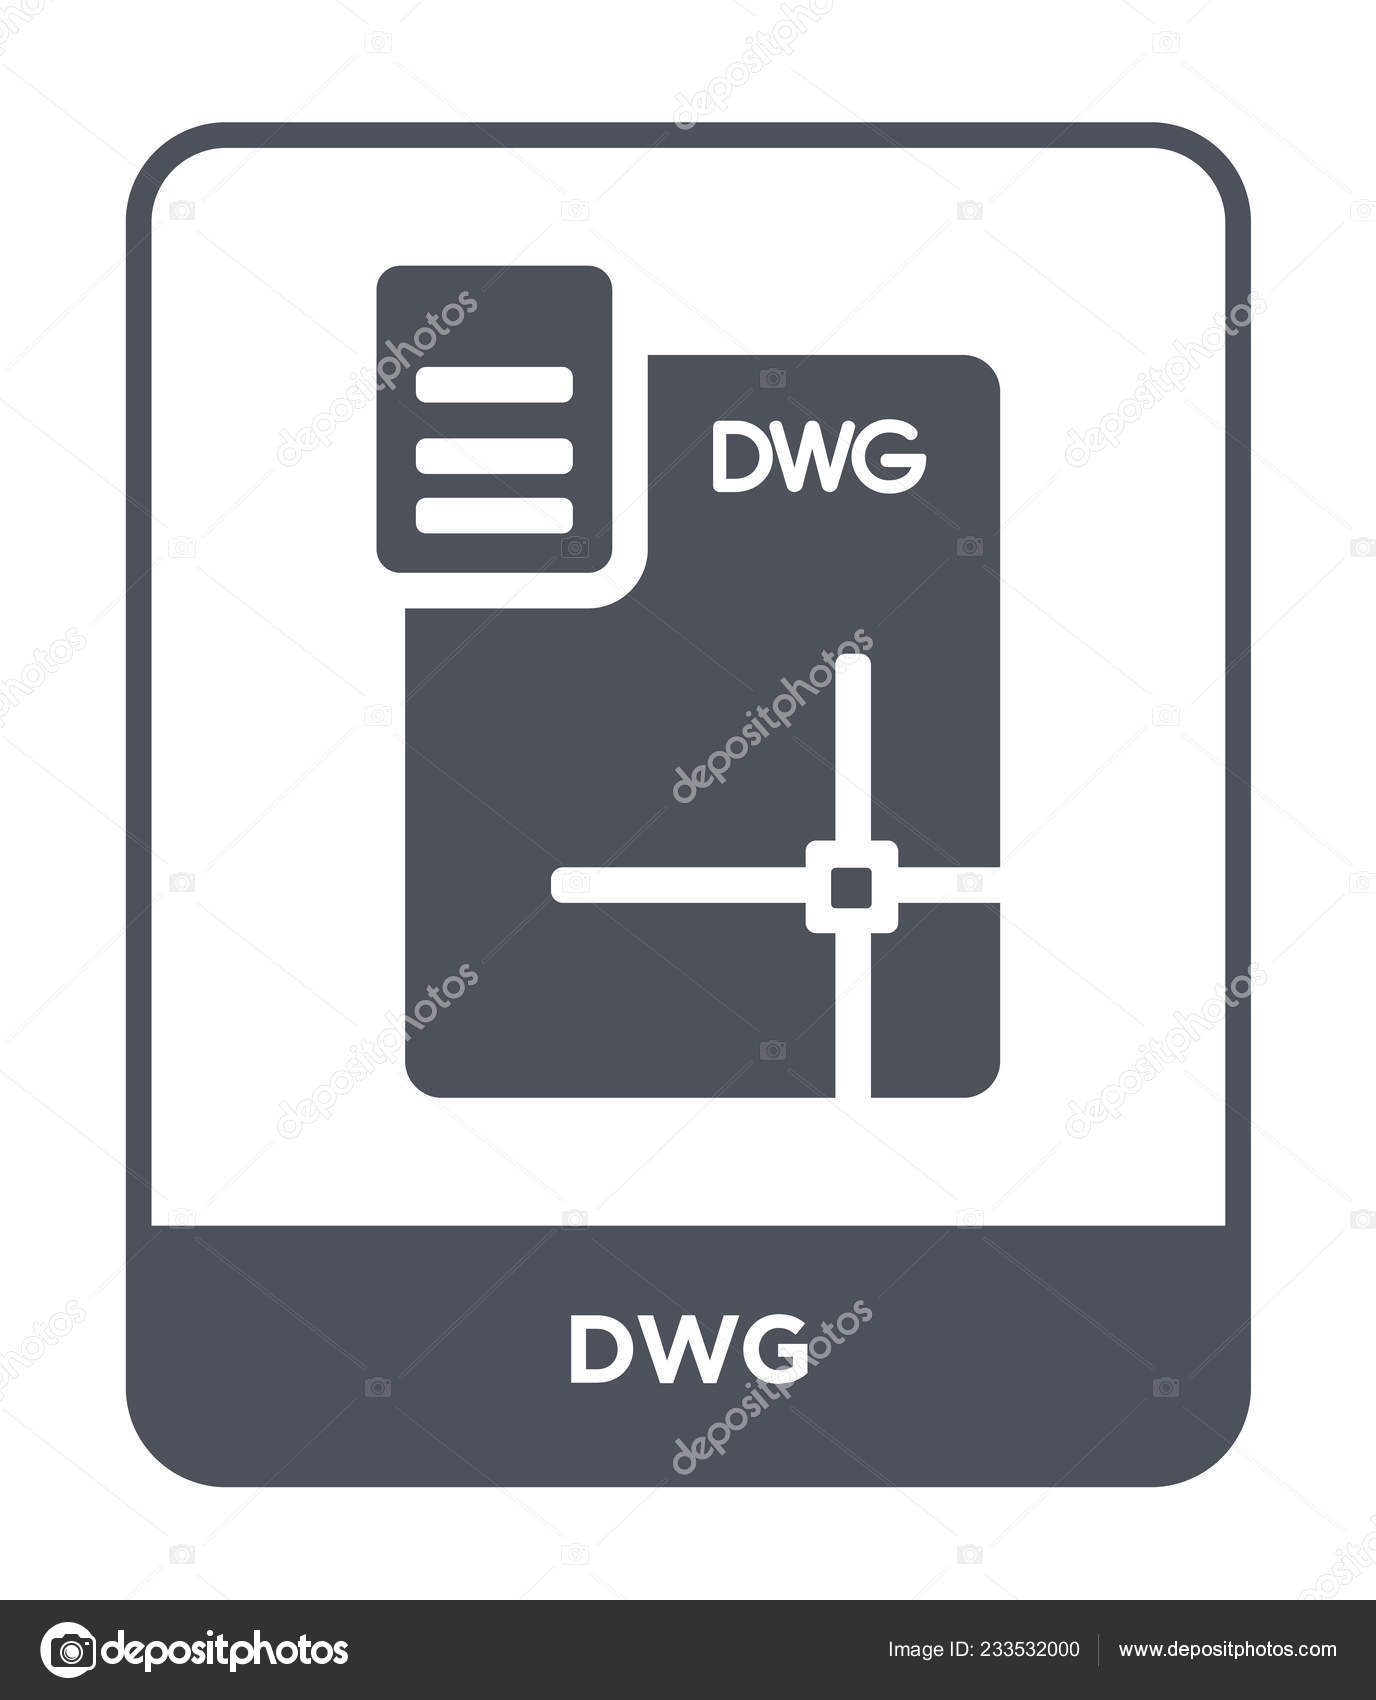 Vetor de Image file icons. Download JPG, PNG, GIF and BMP symbol sign. Web  Buttons. Eps10 Vector. do Stock